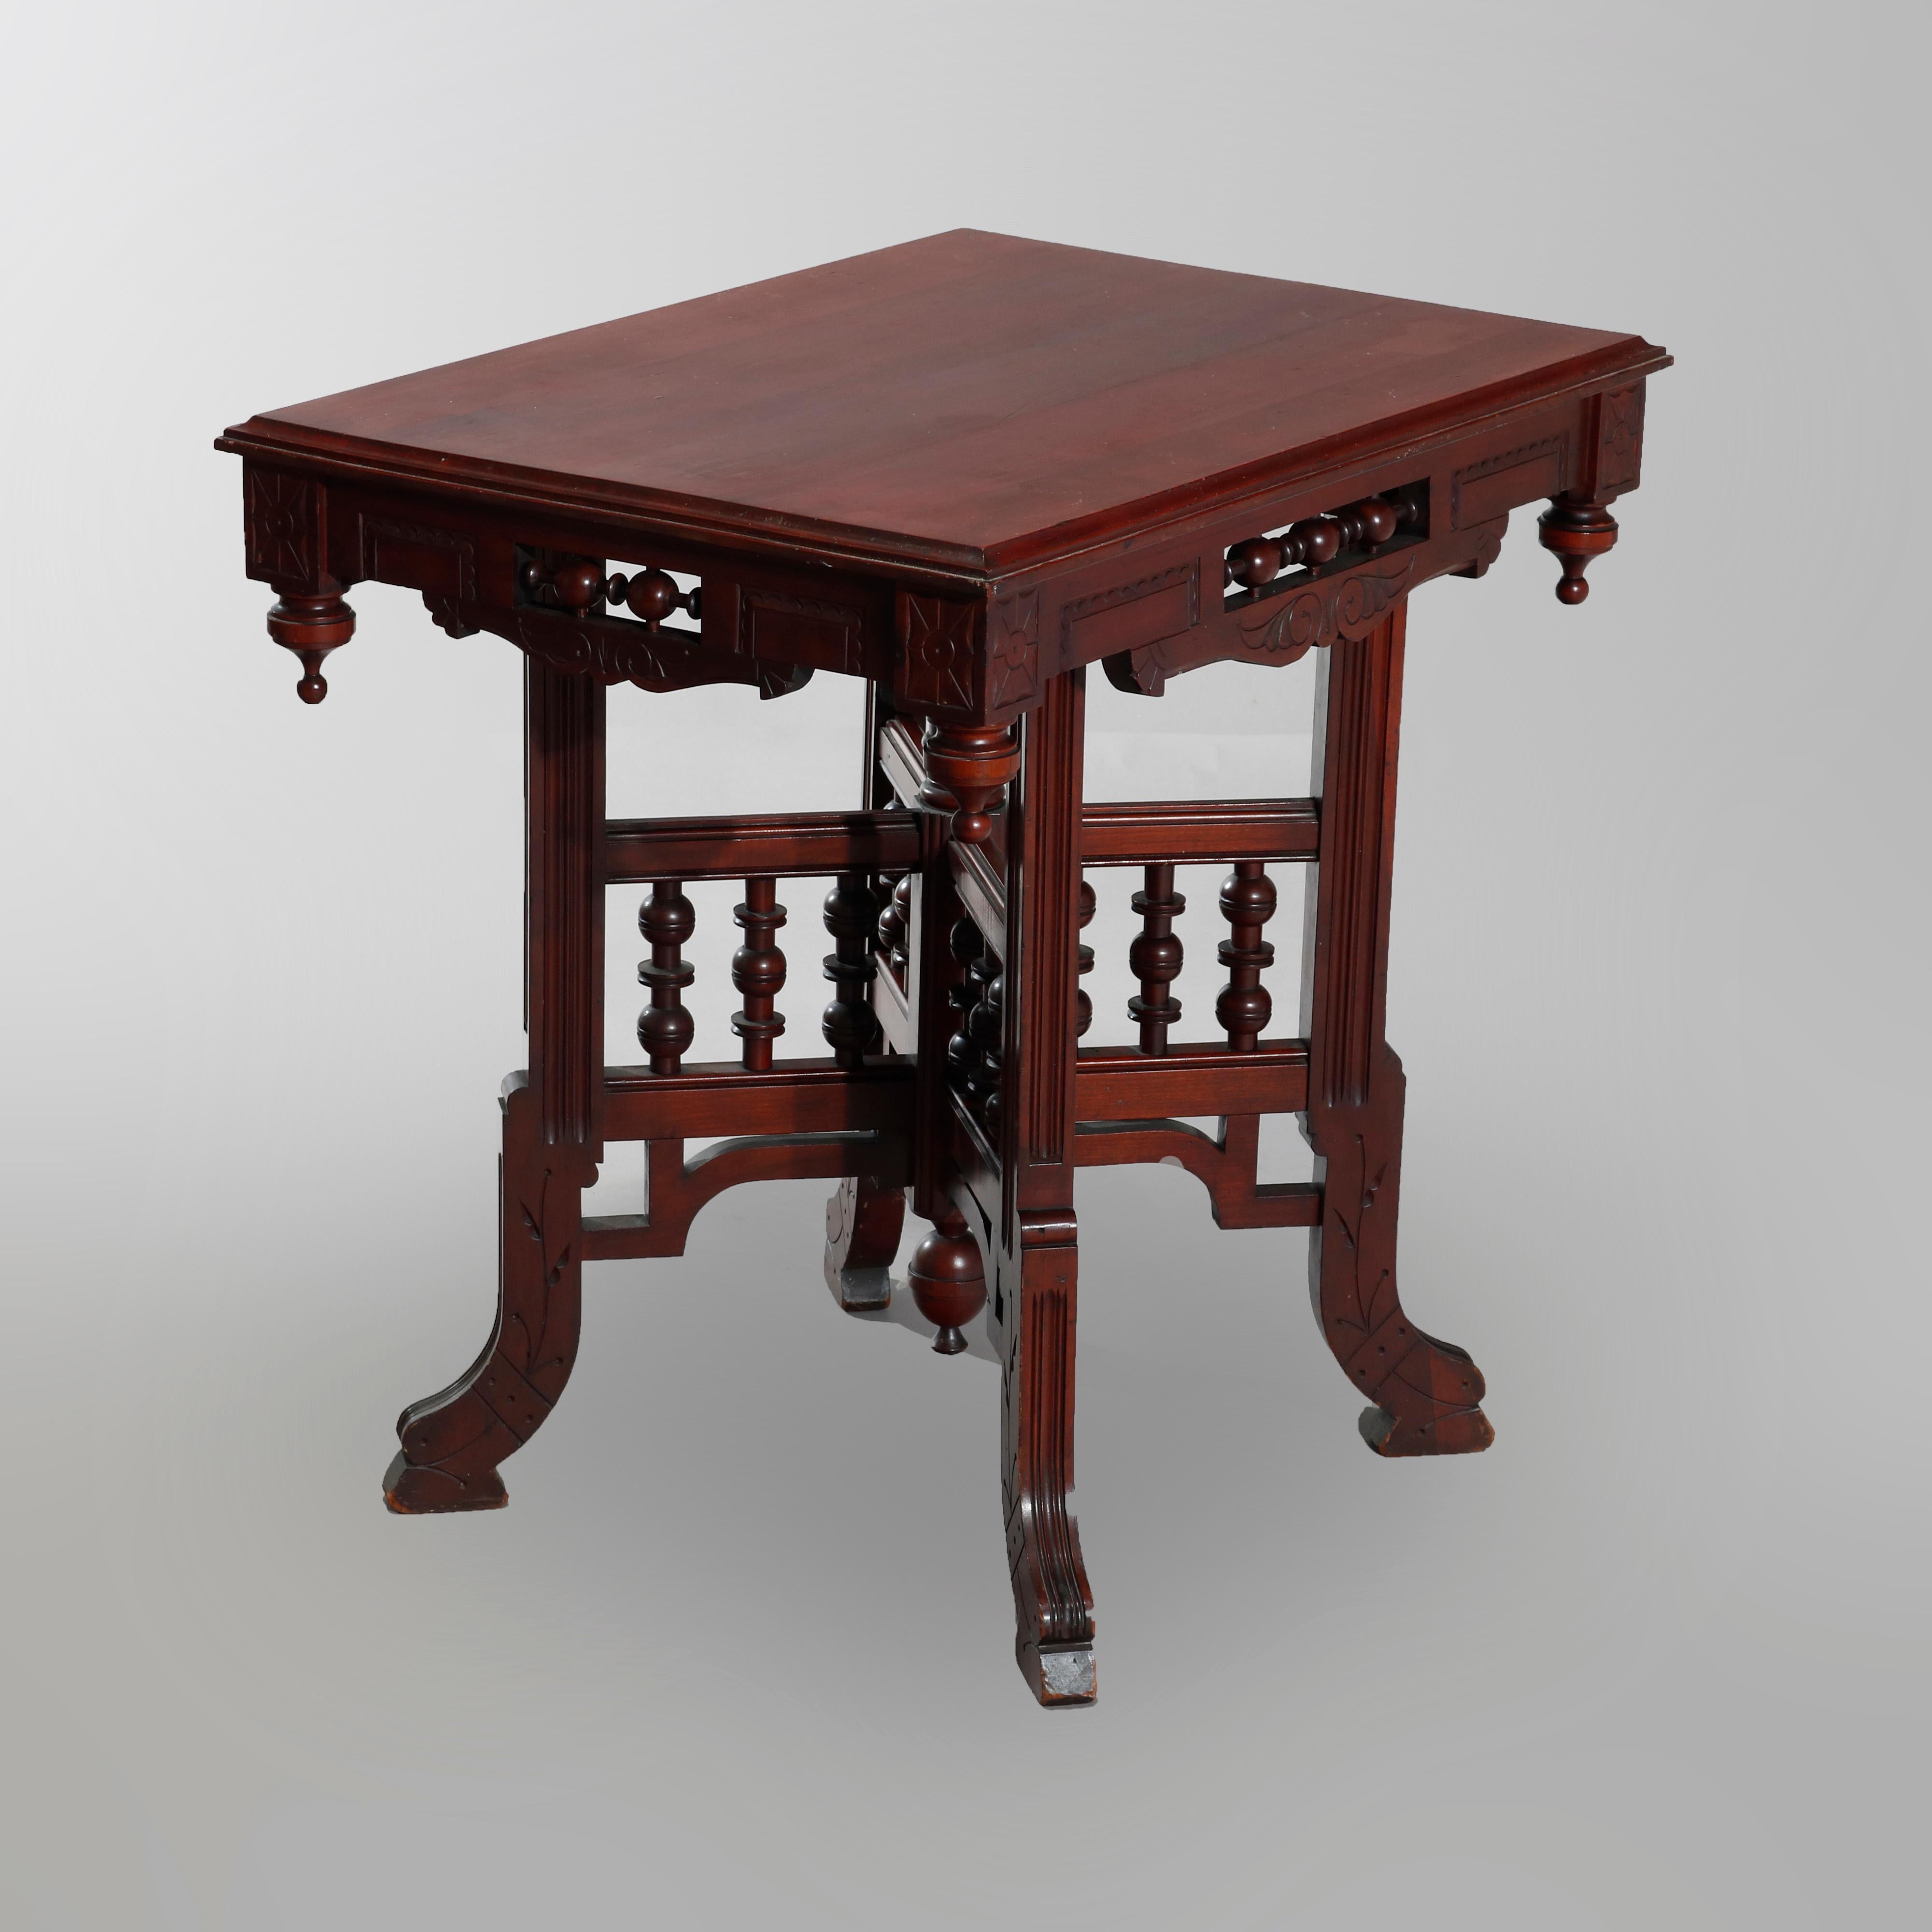 An antique Eastlake parlor lamp table offers cherry construction with top with stick and ball skirt and drop finials surmounting X-form base with stick and ball spindles, circa 1890

Measures: 28.63